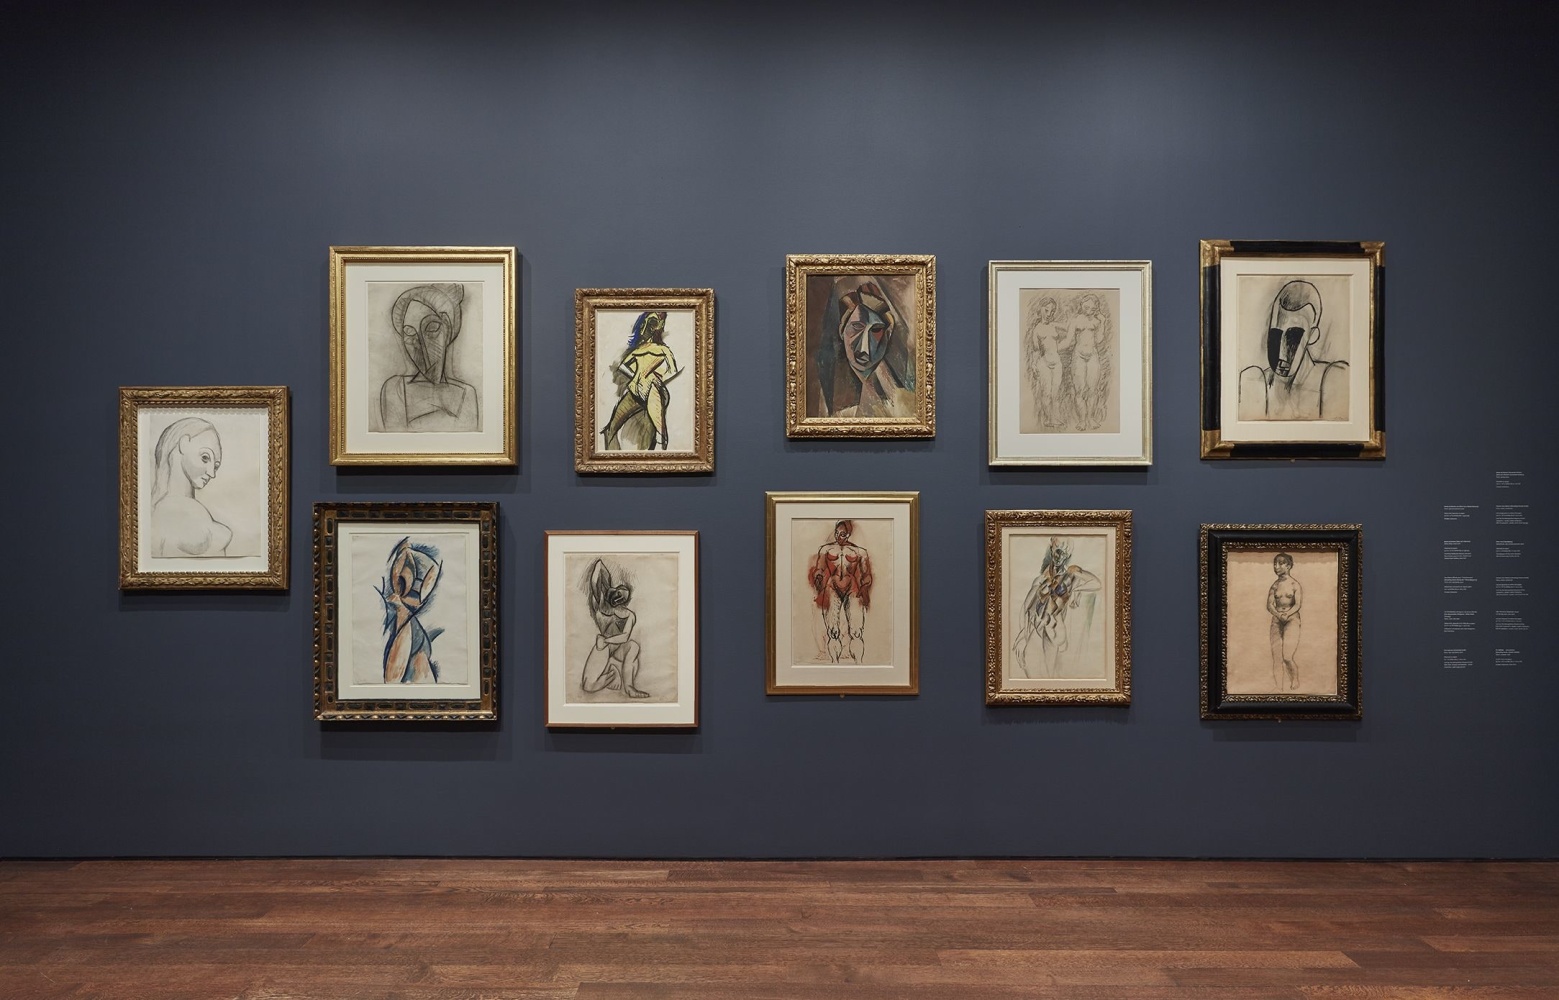 Installation view of&amp;nbsp;PICASSO: Seven Decades of Drawing by Kent Pell.&amp;nbsp;&amp;copy; 2022 Estate of Pablo Picasso / Artists Rights Society (ARS), New York.